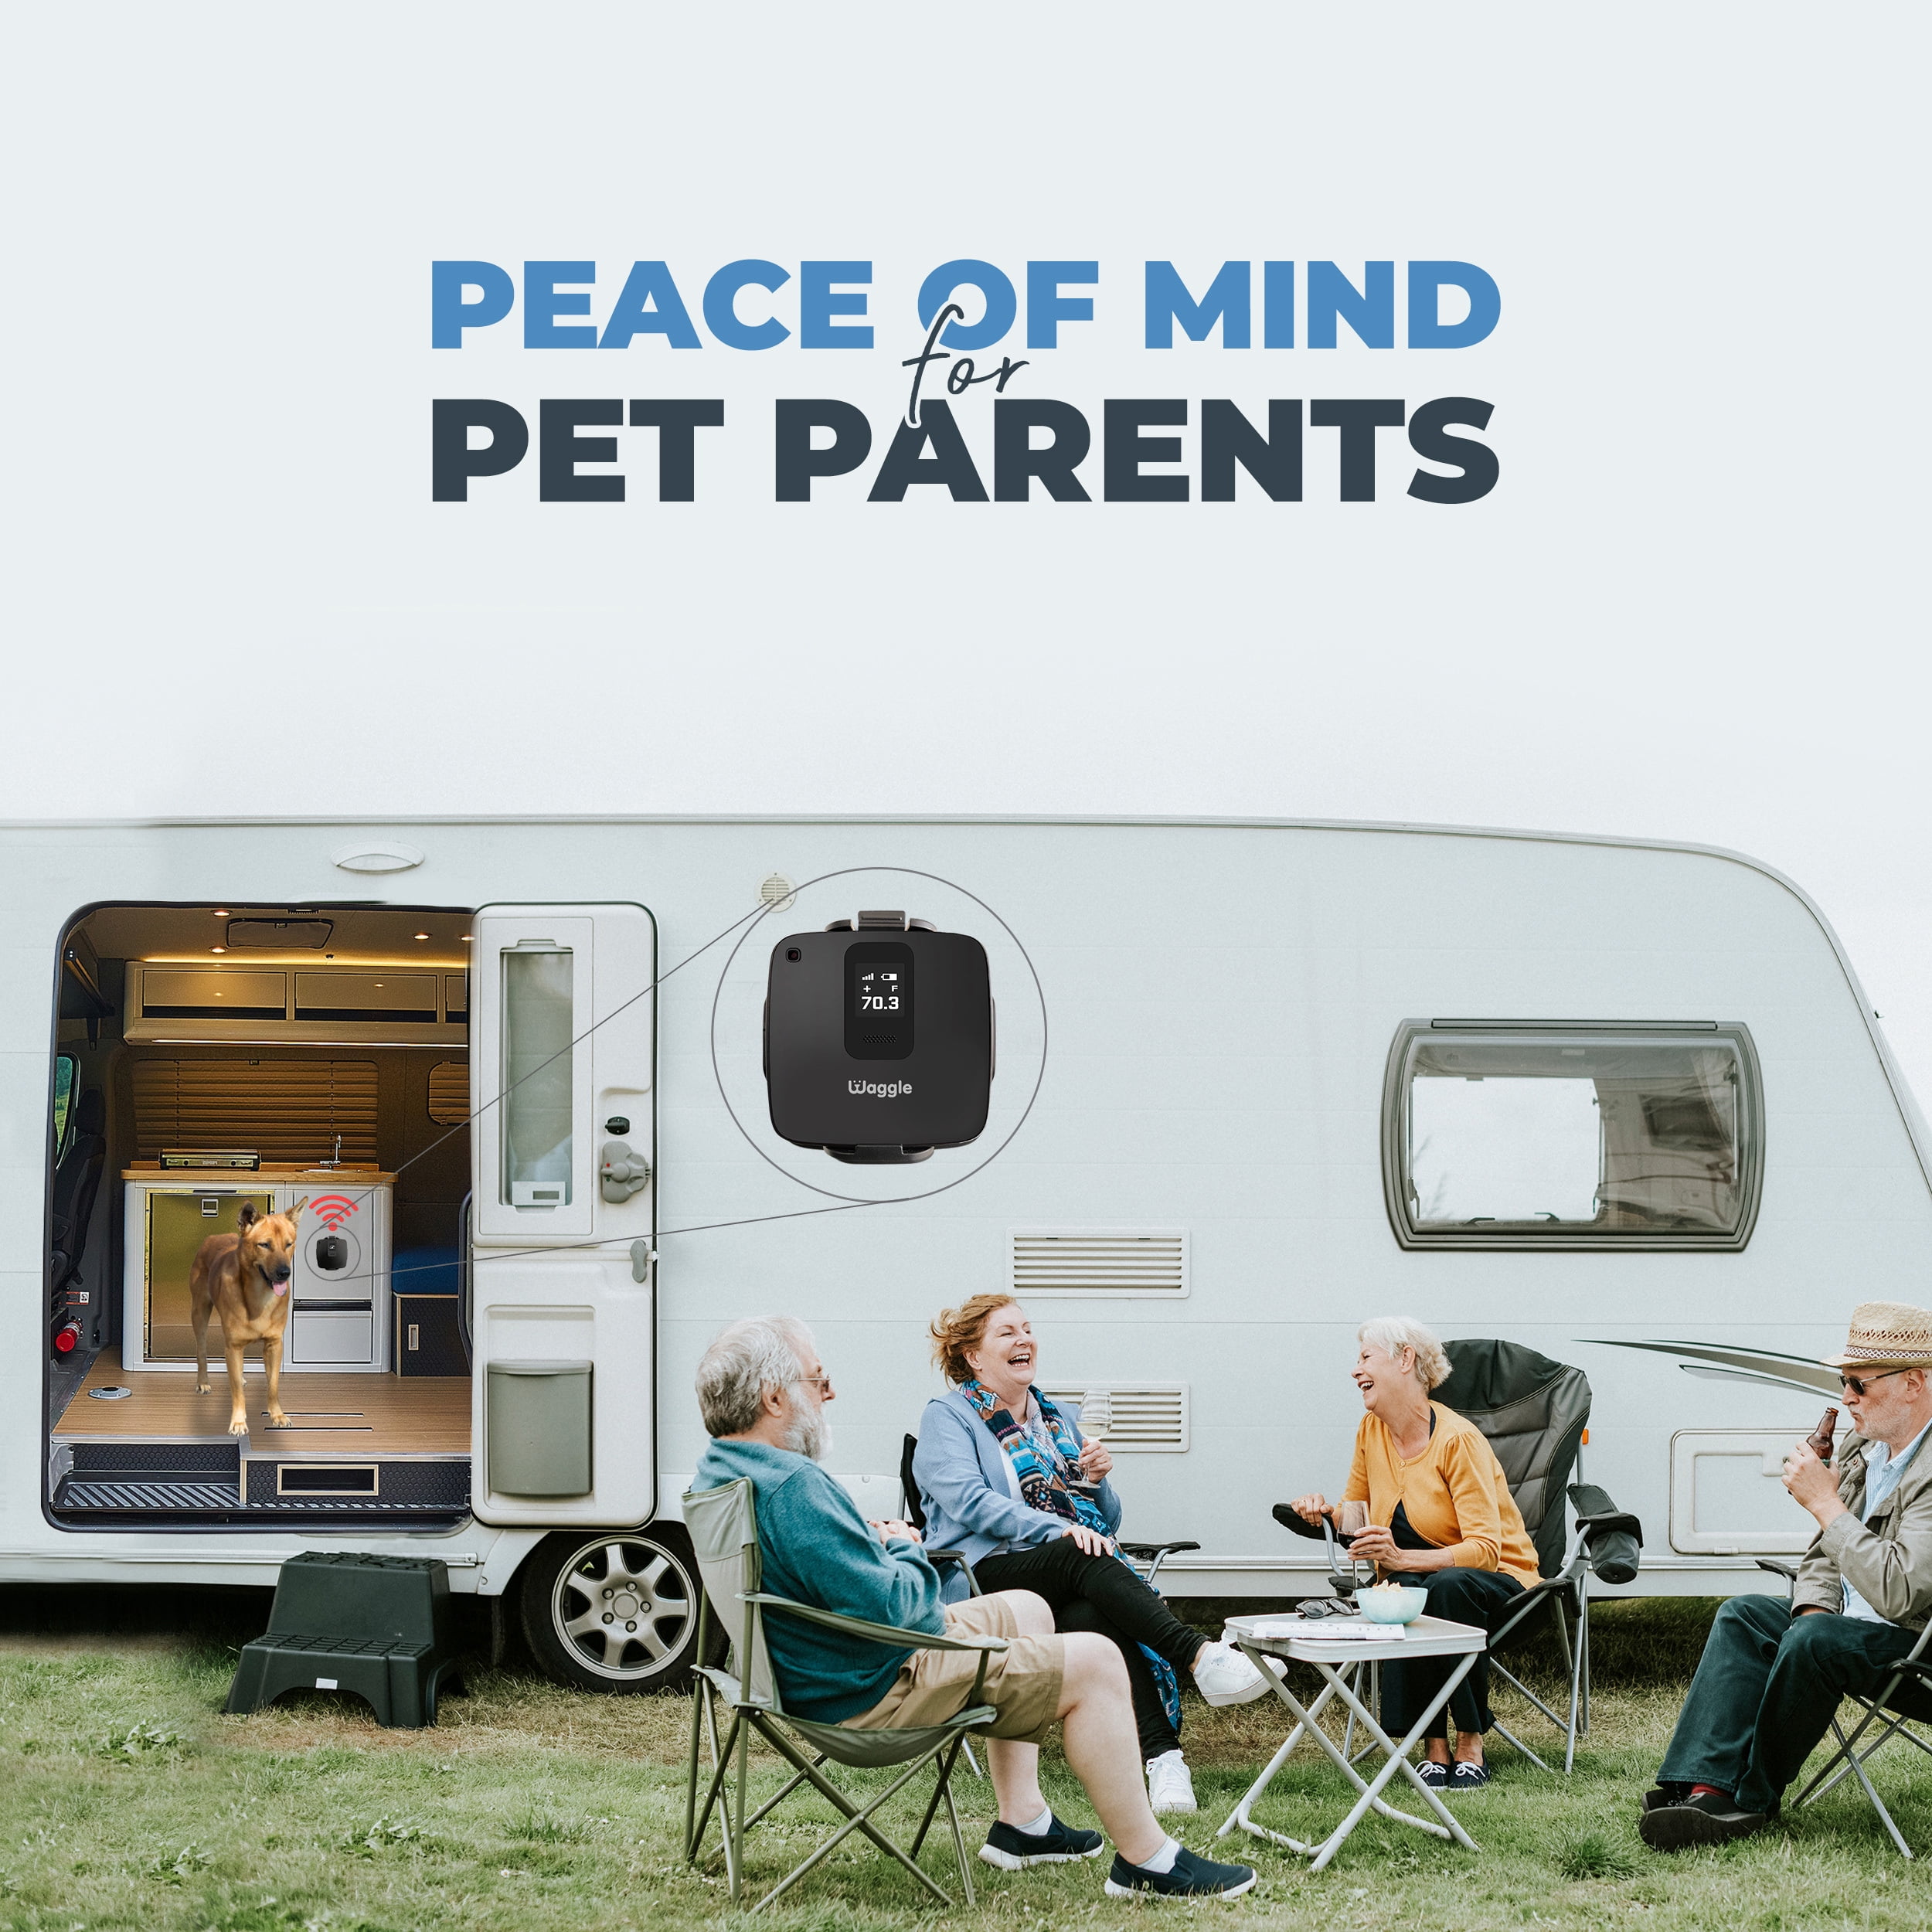 Waggle RV/Dog Safety Temperature & Humidity Sensor, Wireless Pet monitoring  system, Verizon Cellular, Instant Alerts on Temp/Humidity/Power loss via  SMS/Email 24/7, No WiFi